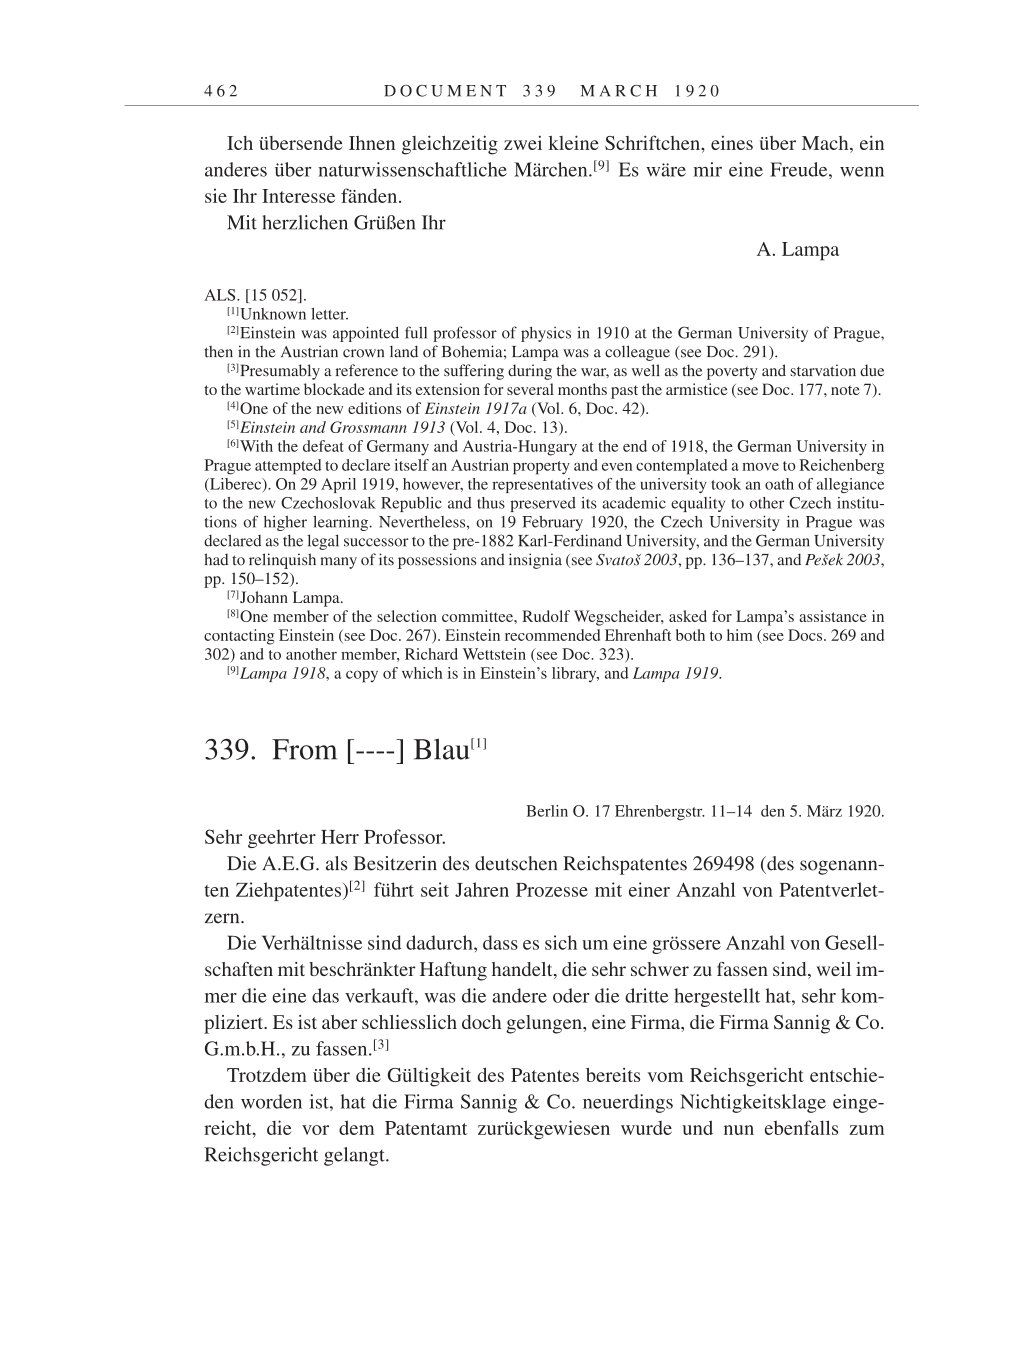 Volume 9: The Berlin Years: Correspondence January 1919-April 1920 page 462